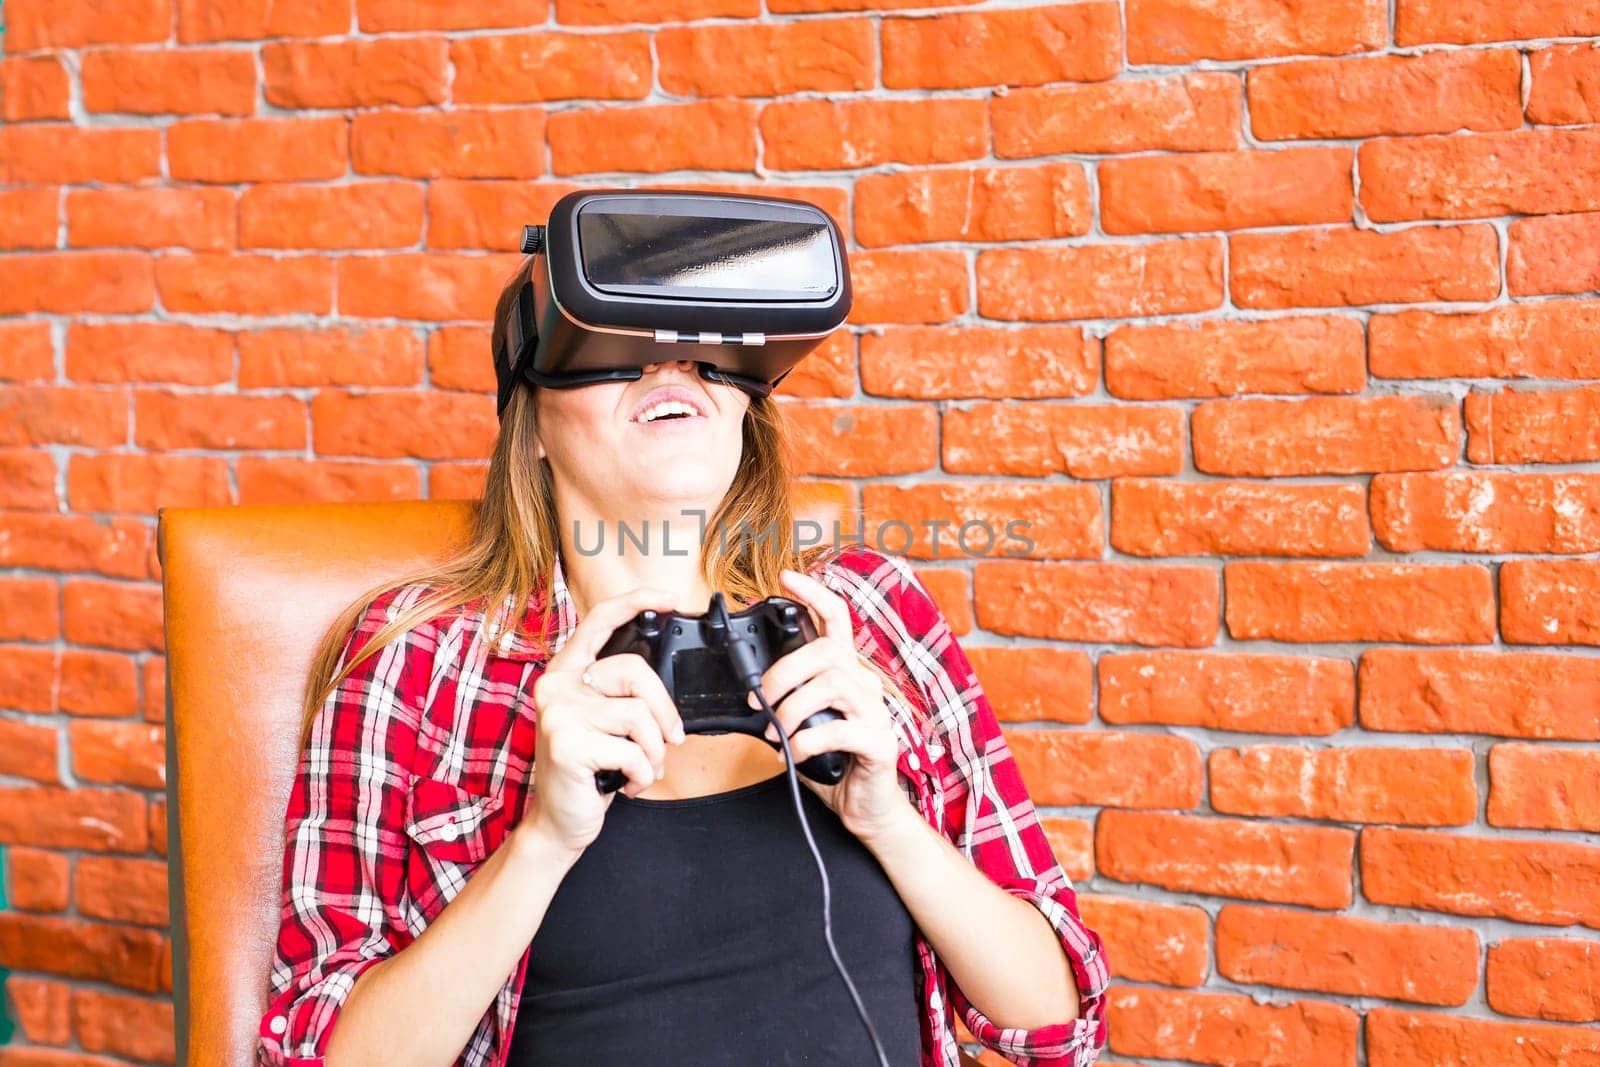 Woman play video game with joystick and VR device by Satura86